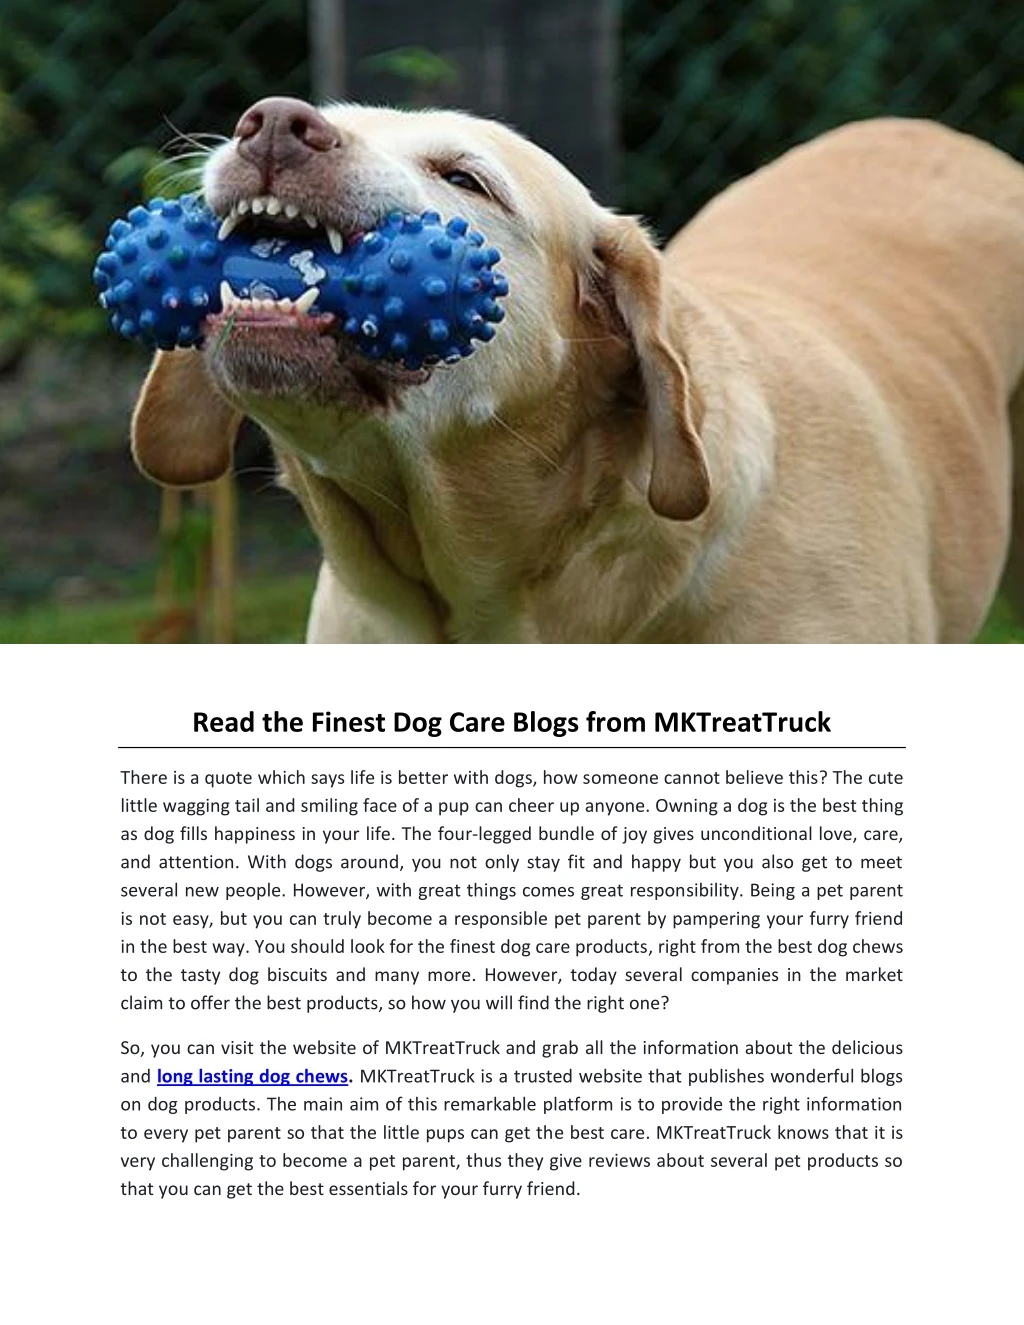 read the finest dog care blogs from mktreattruck